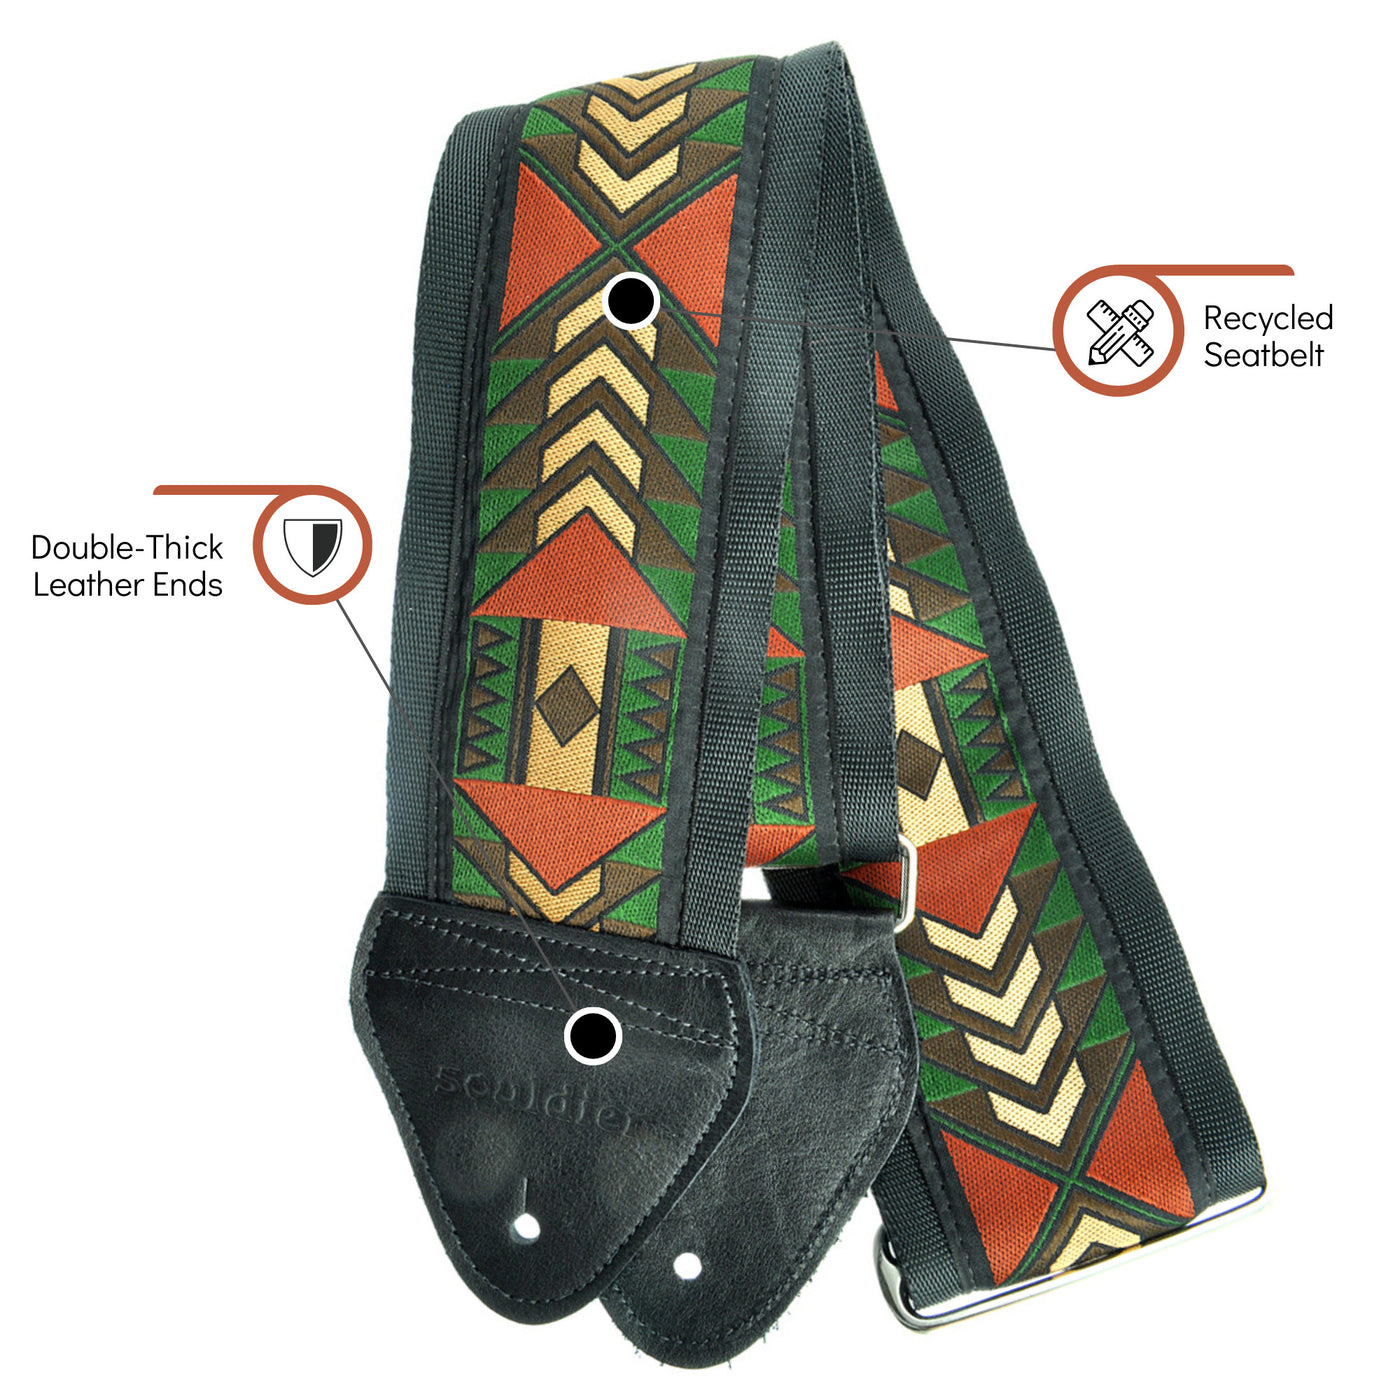 Souldier GT0784BK02BK - Handmade Souldier Fabric Bass Strap, 3 Inches Wide and Adjustable from 33" to 60" Made in the USA, Tigard